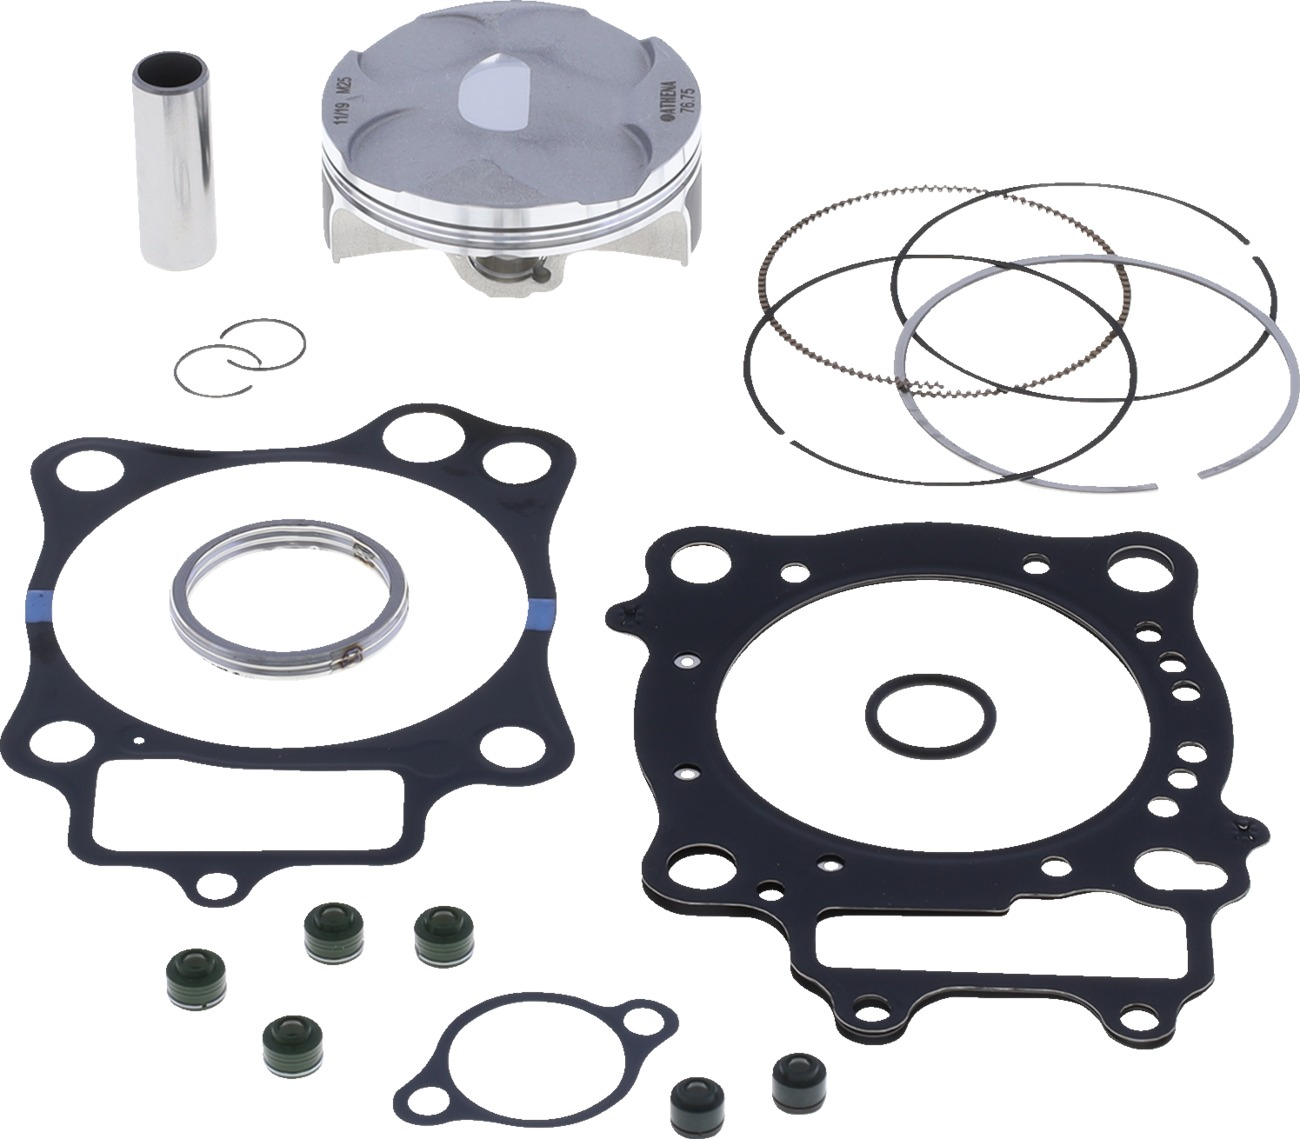 Piston & Top End Gasket Kit 'B' - For 16-17 Honda CRF250R - Click Image to Close